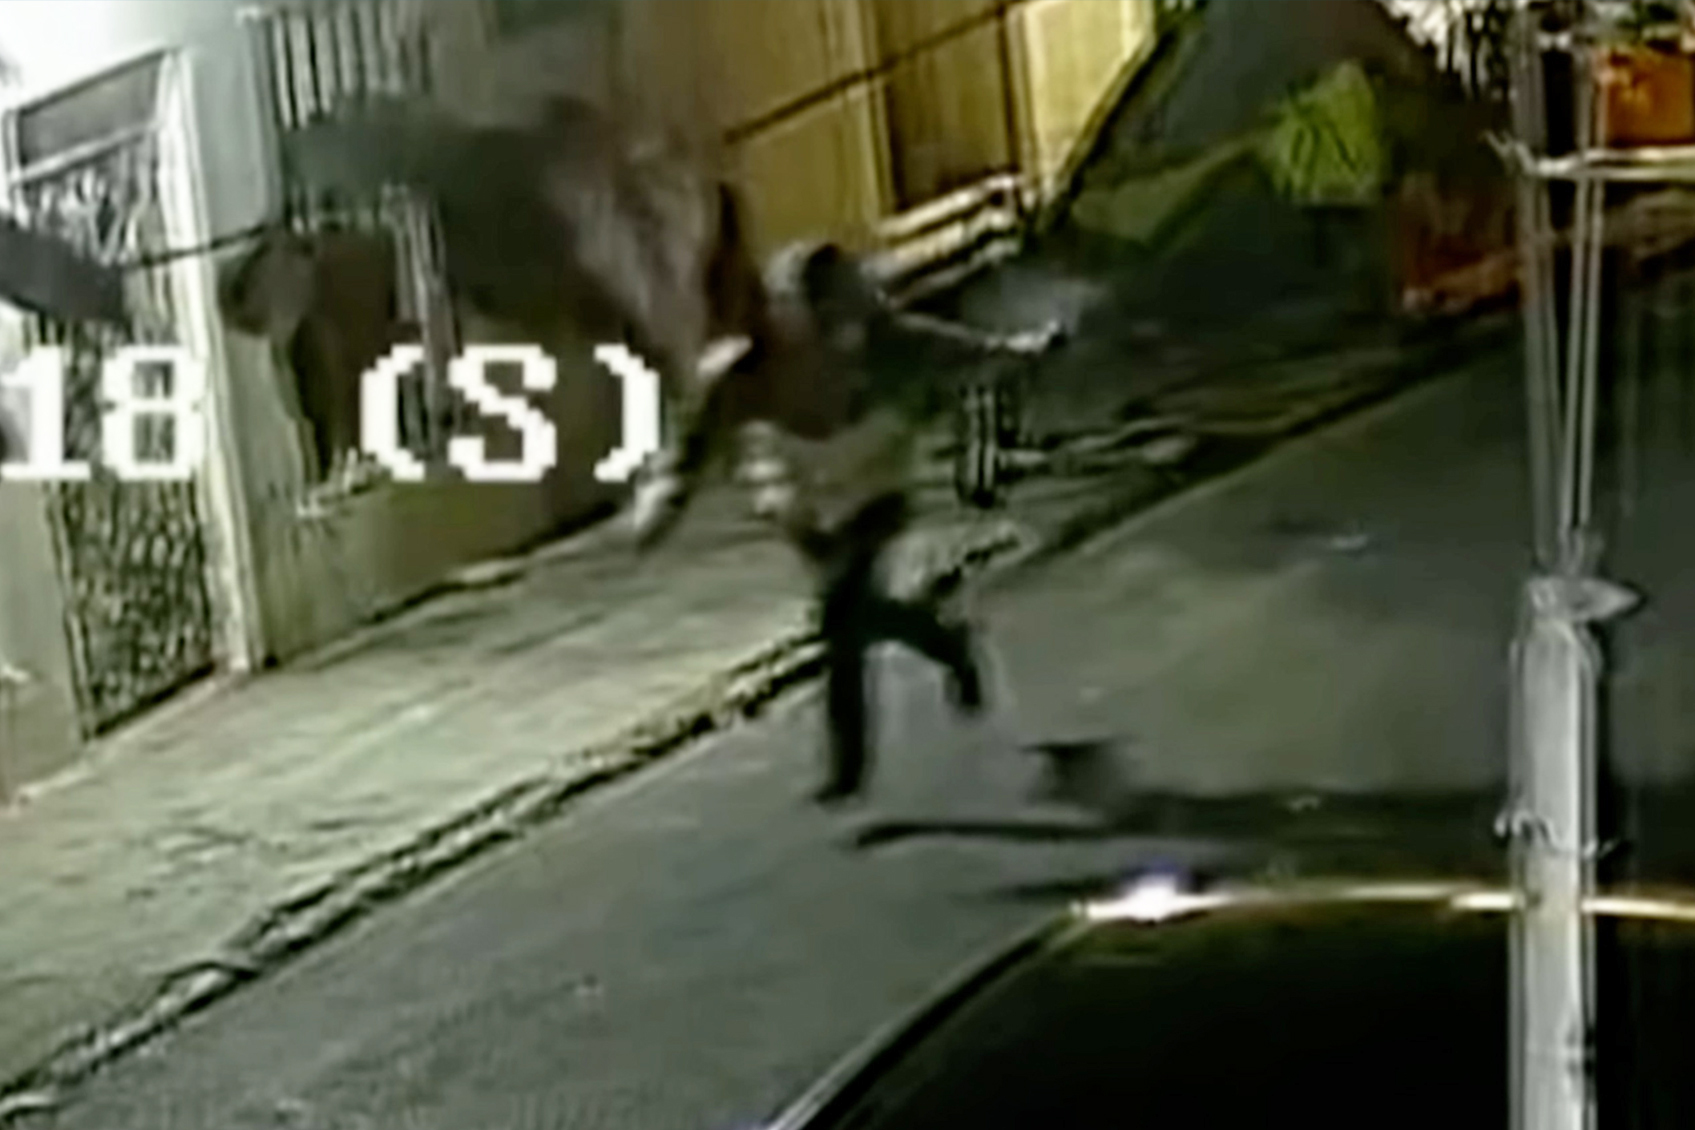 A person is jumping in the air, possibly trying to avoid an object, on a dimly lit street at night, with some buildings and a car in the surroundings.